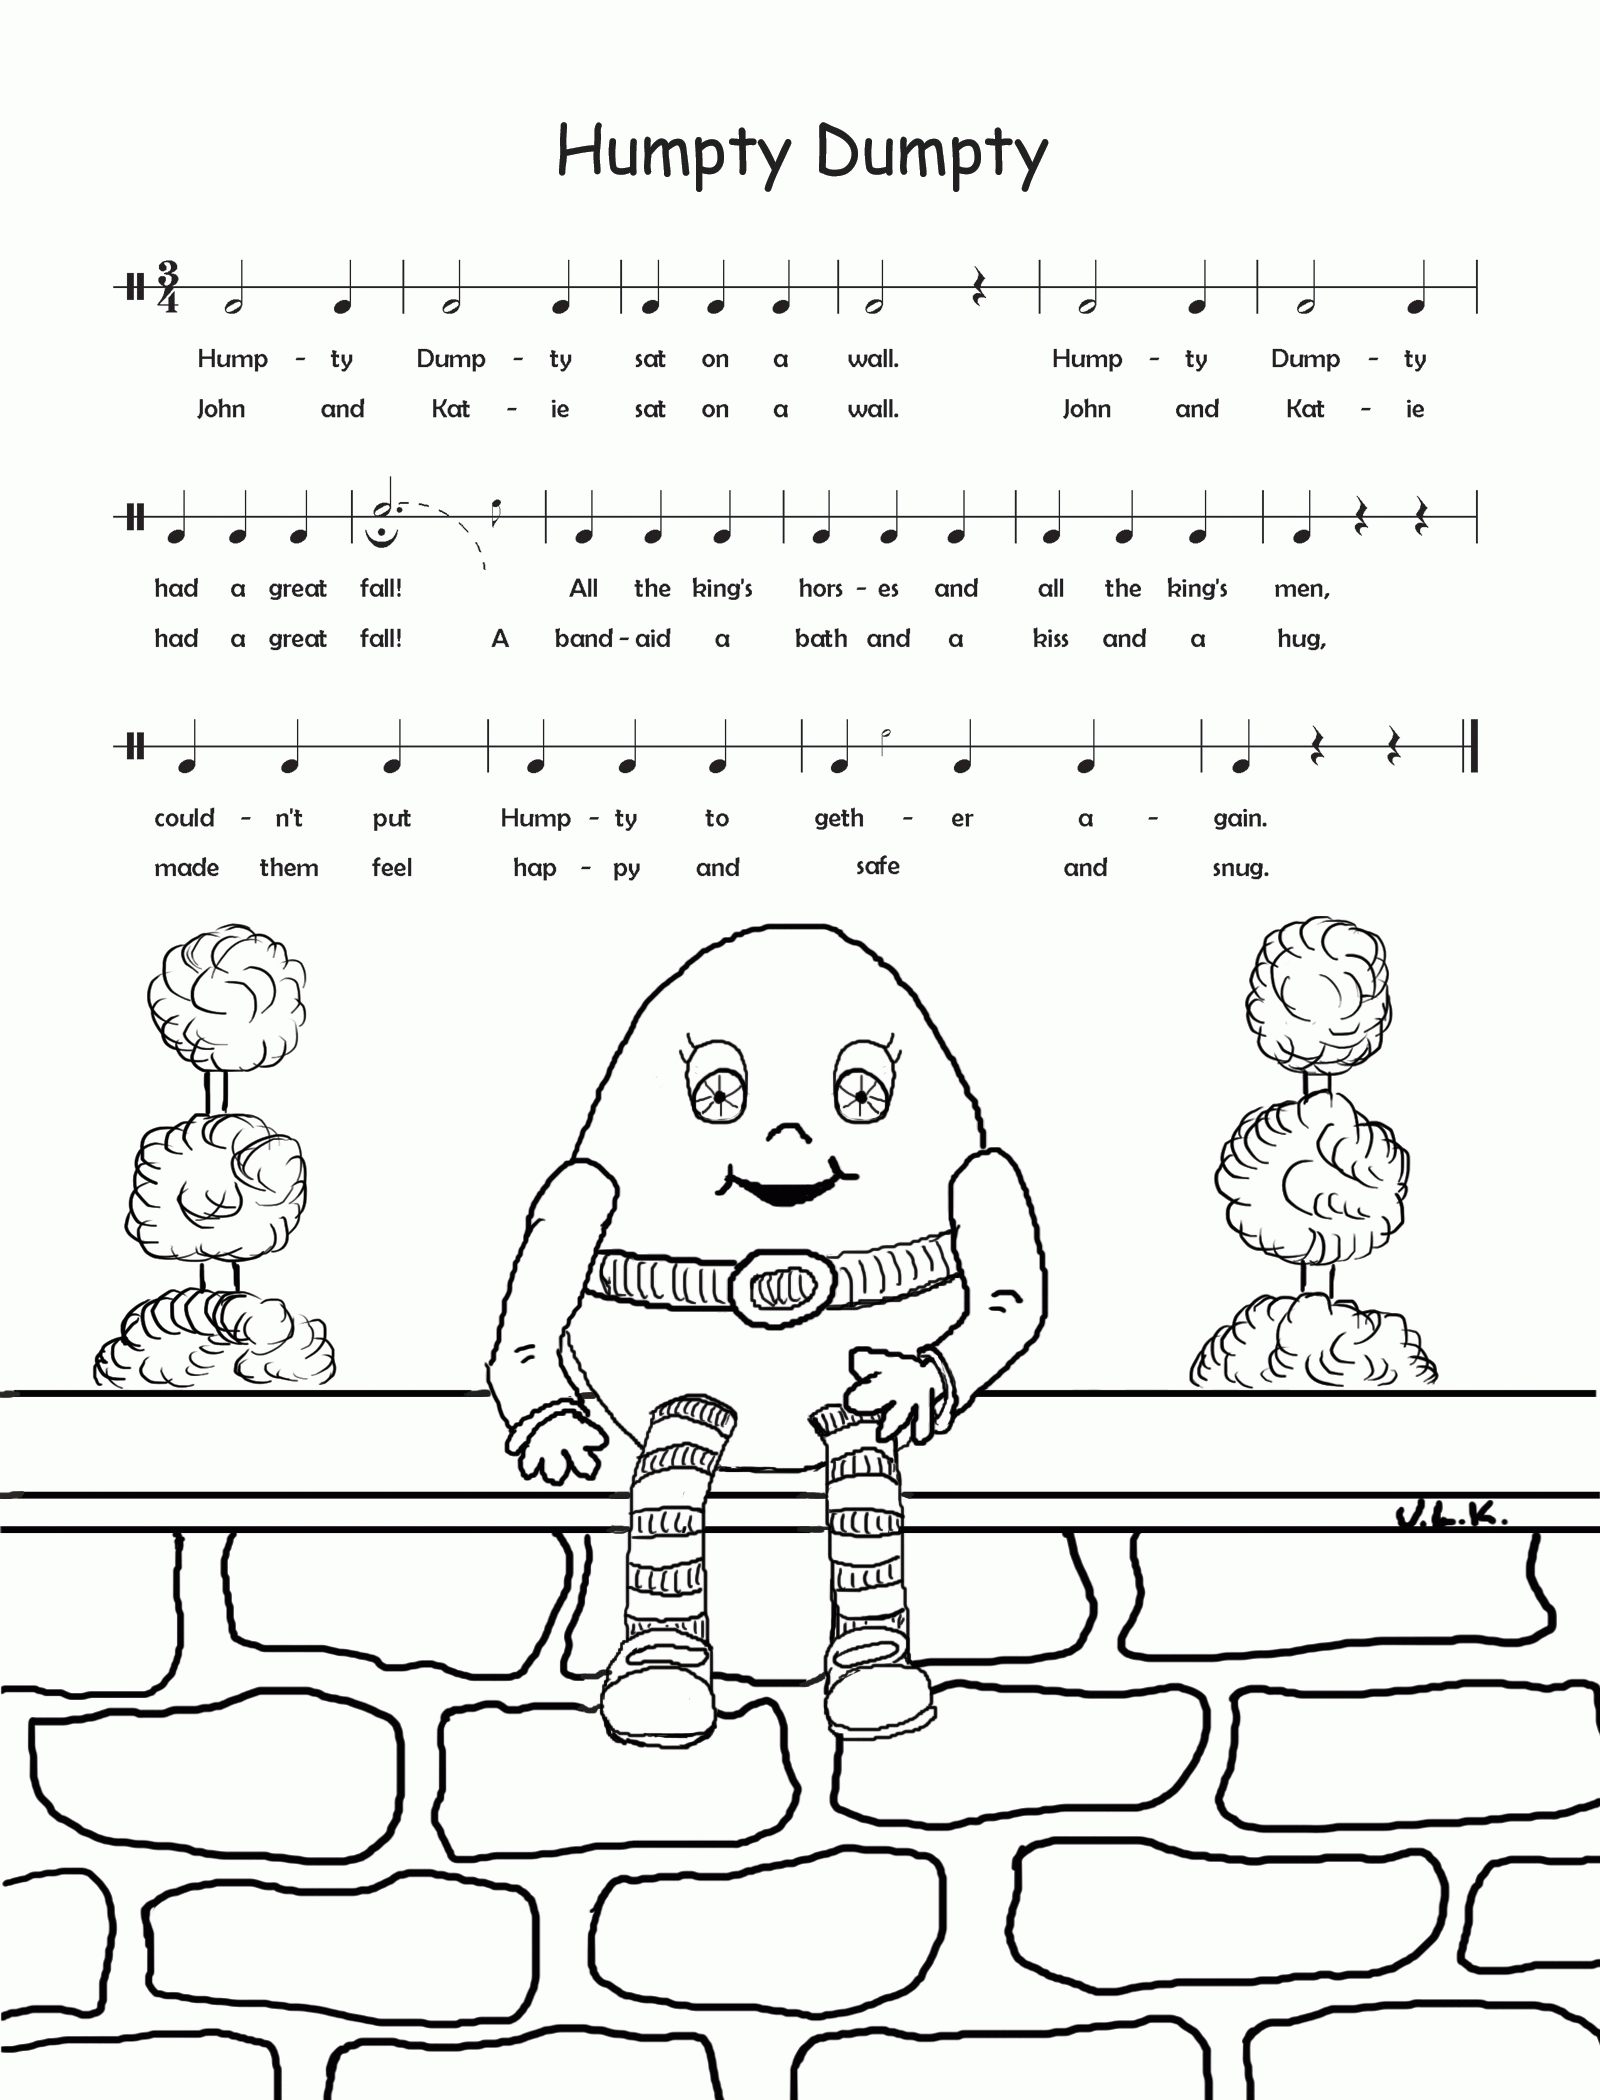 Humpty Dumpty Coloring Page for Pinterest